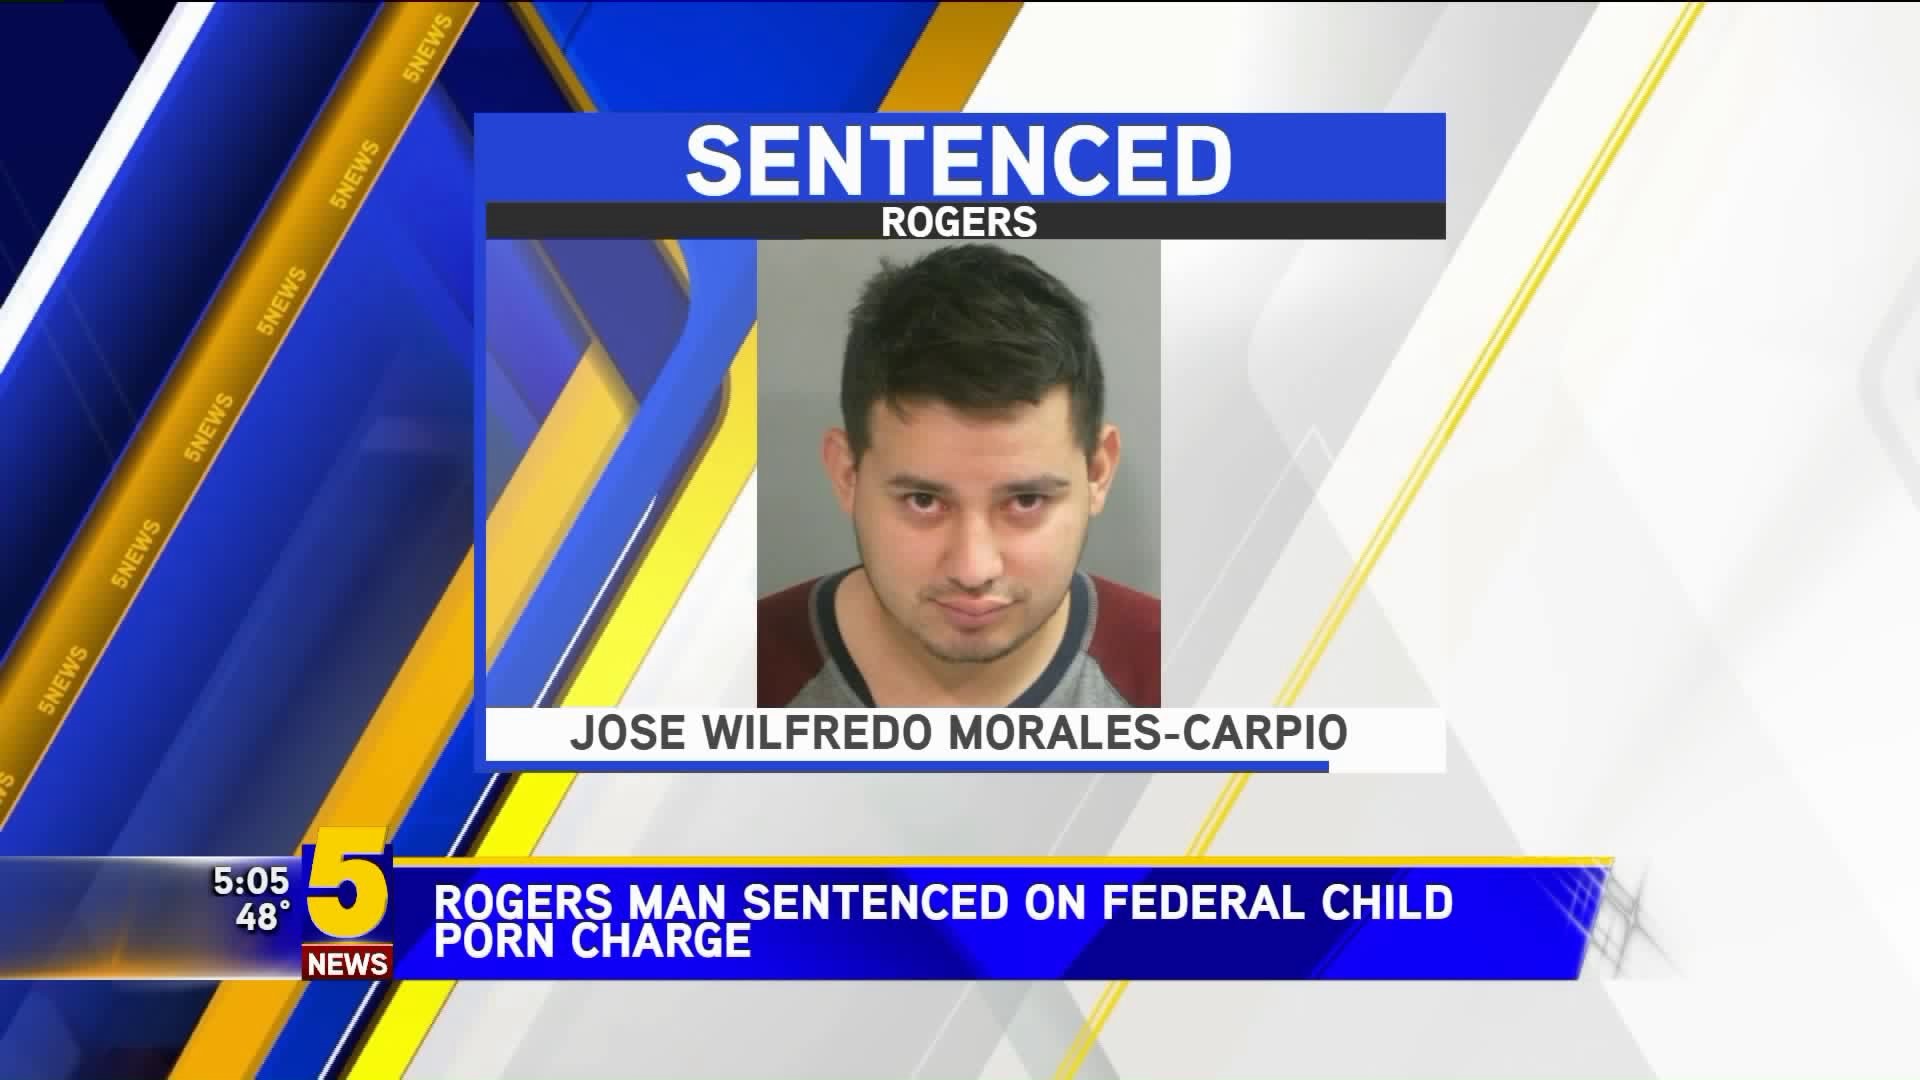 Rogers Man Sentenced On Federal Child Porn Charge